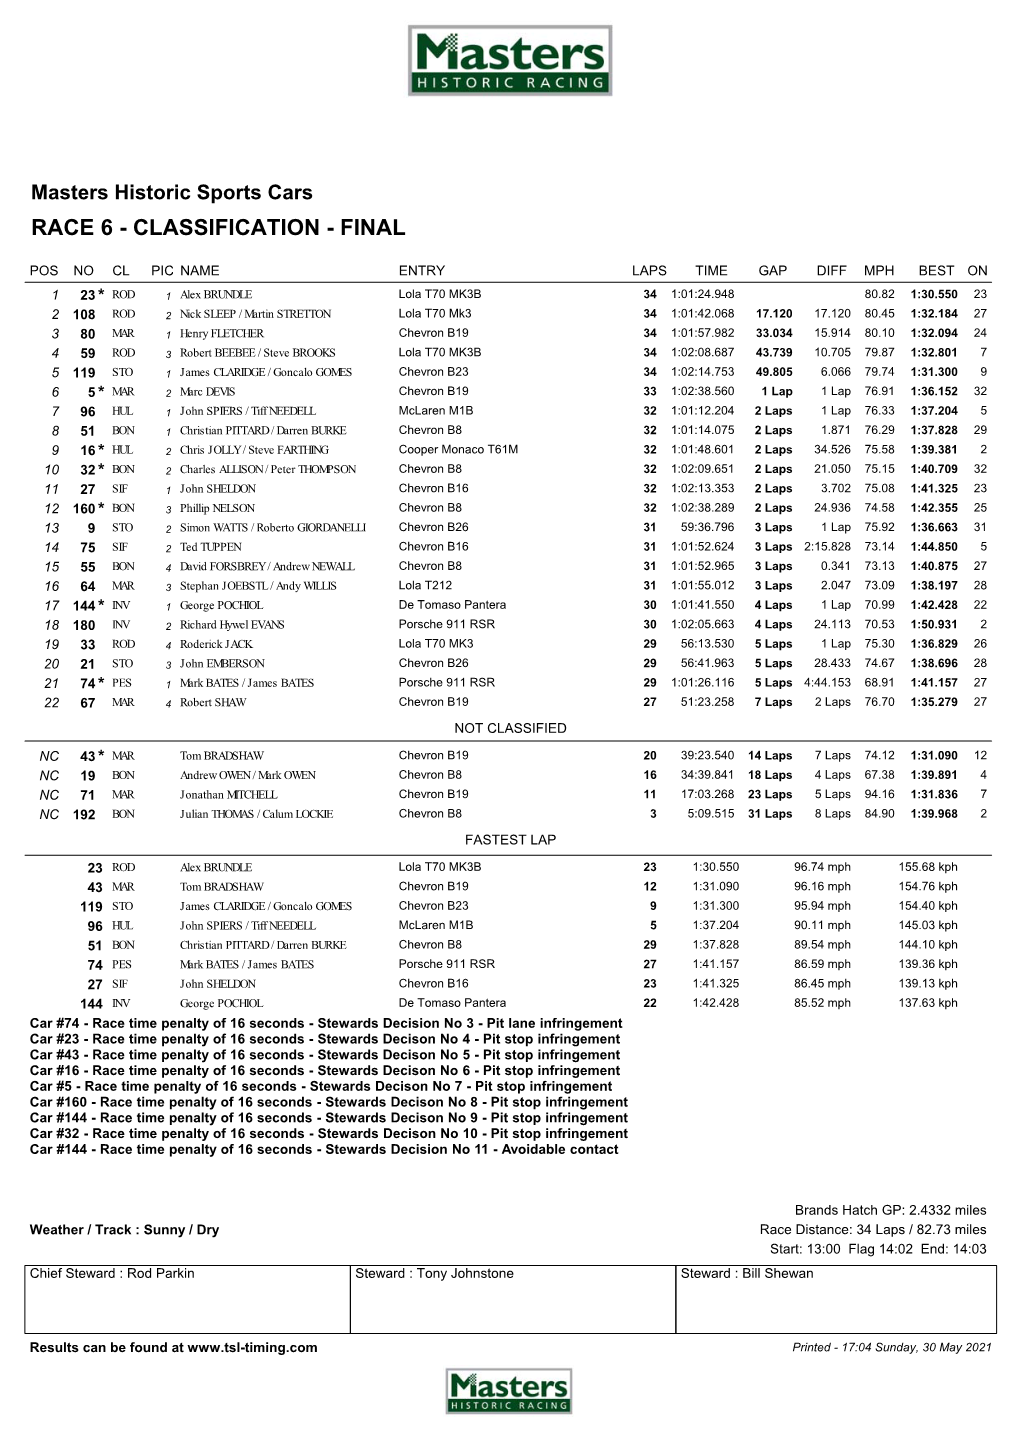 Masters Historic Sports Cars Classification